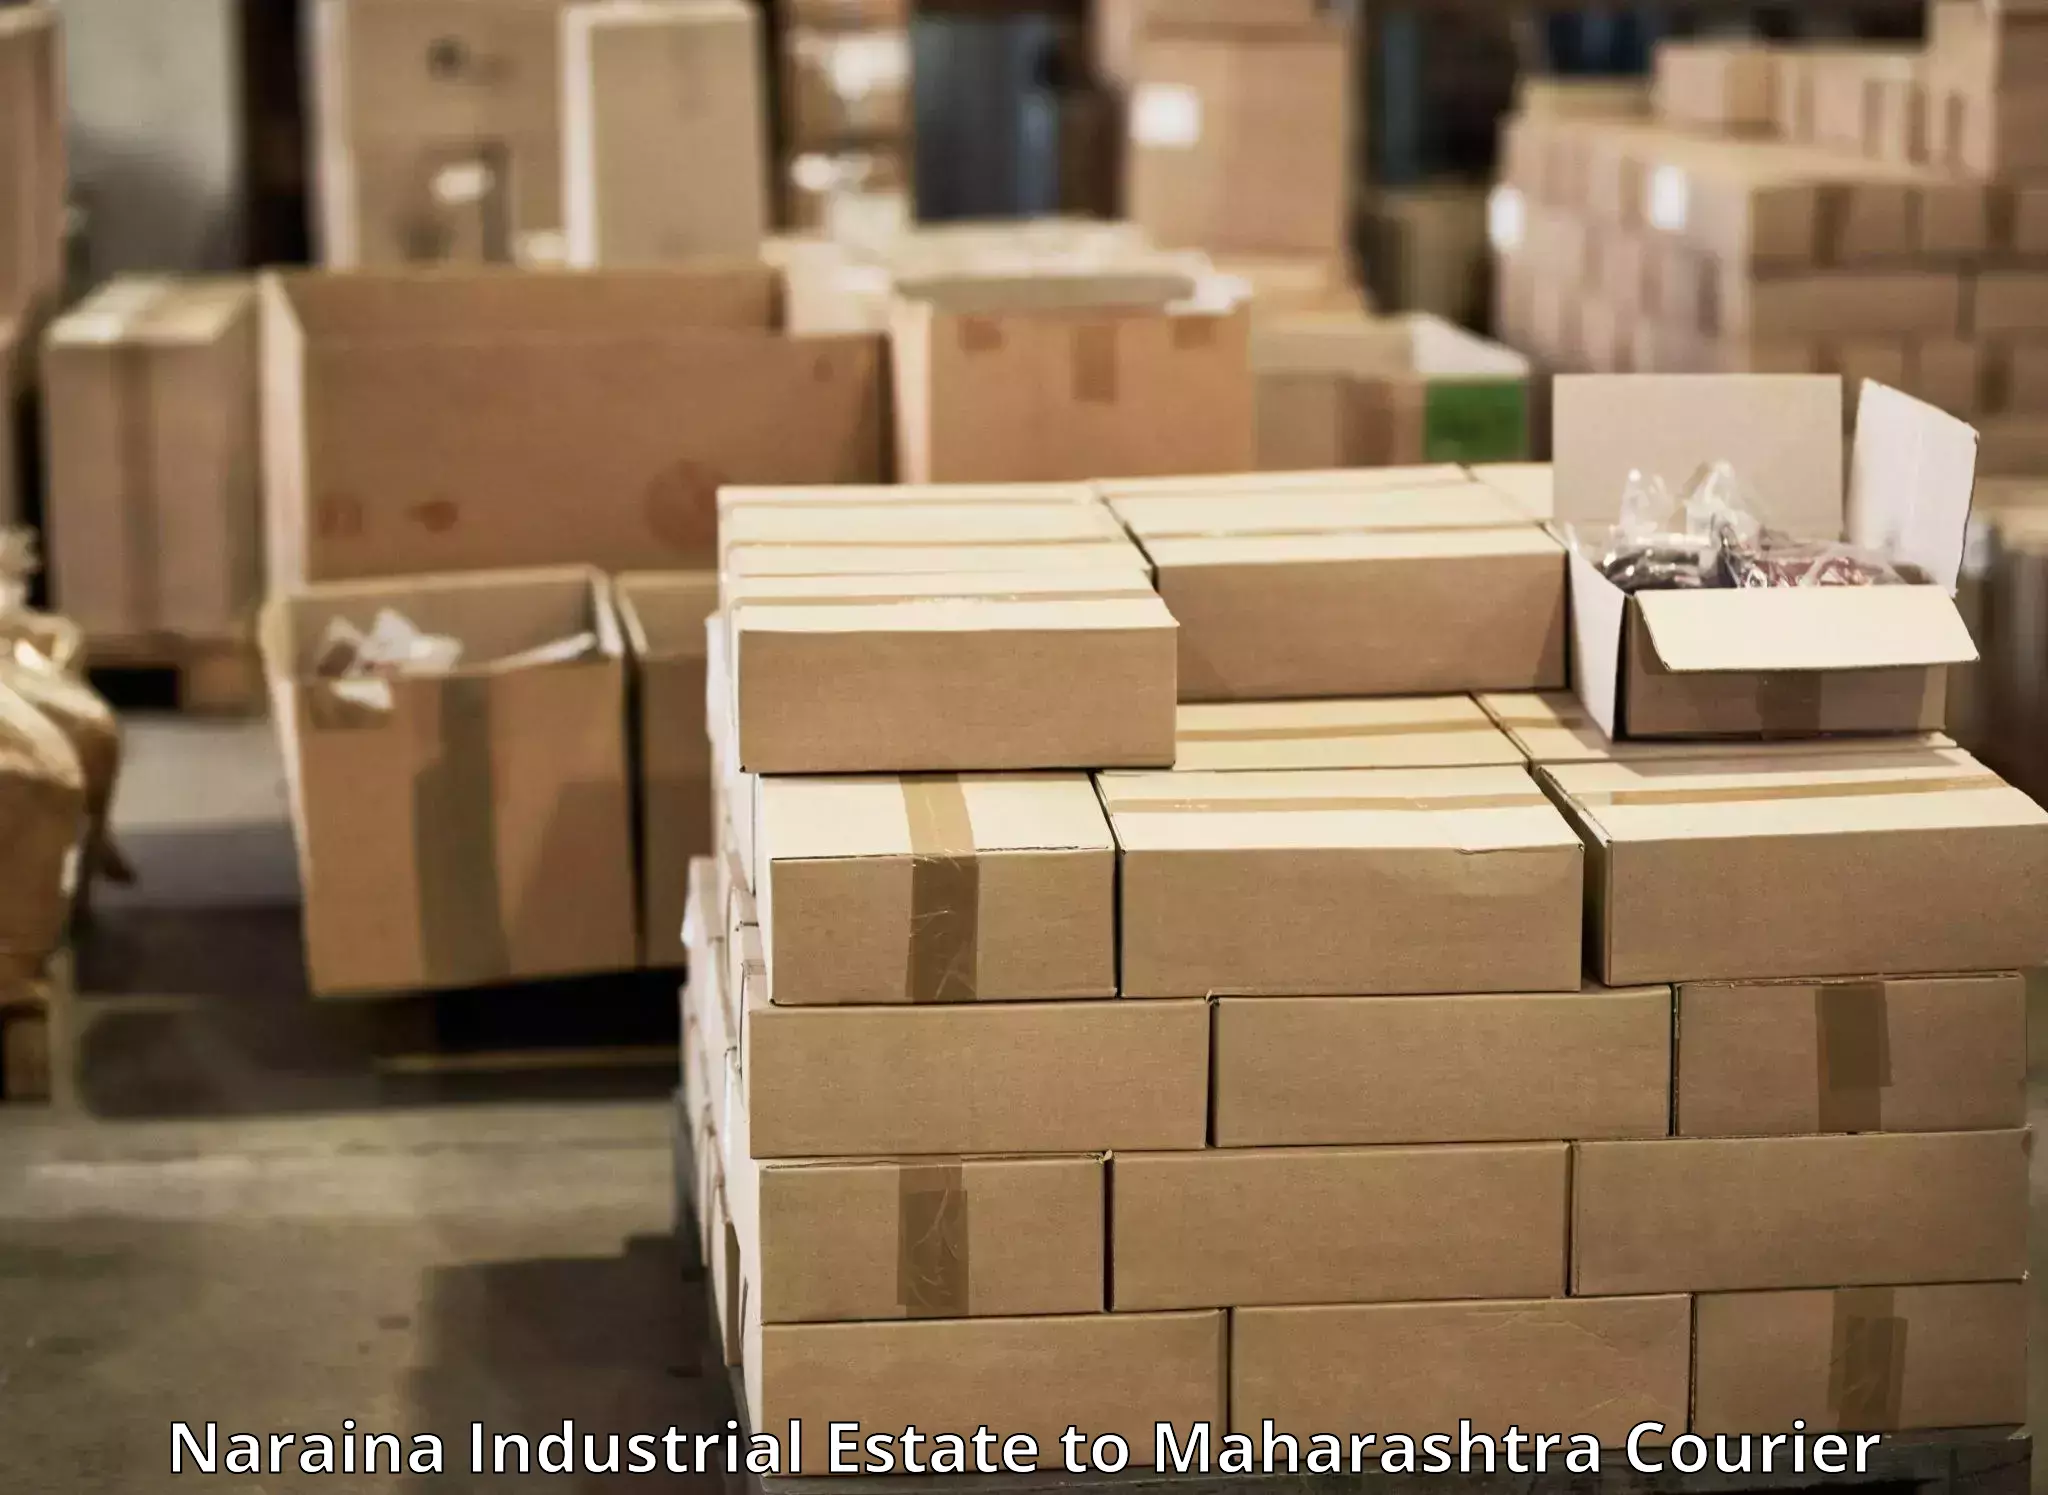 Express delivery capabilities in Naraina Industrial Estate to Mahad